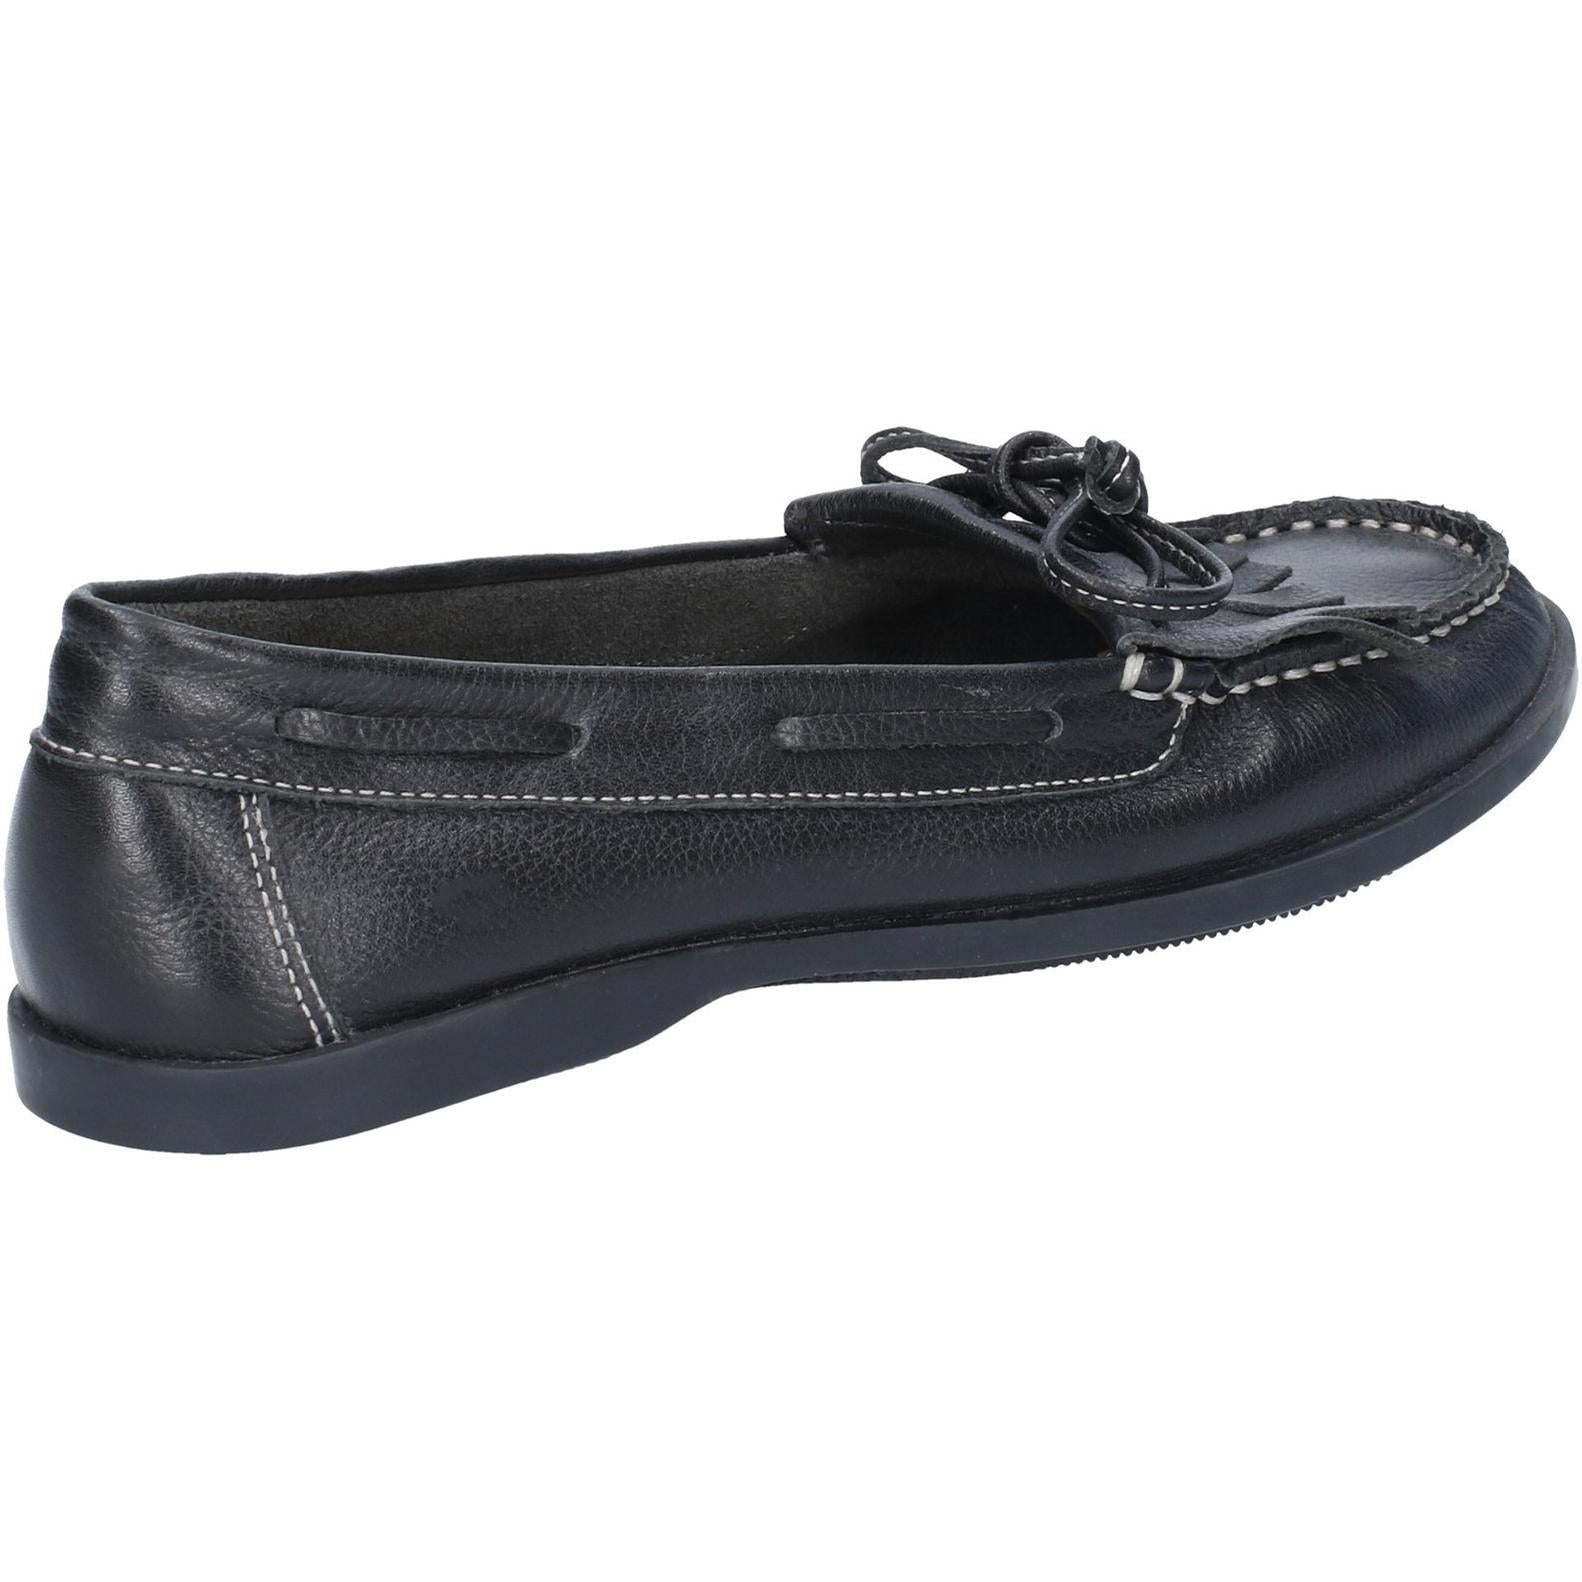 Hush Puppies Coco Moccassin Slip On Shoe